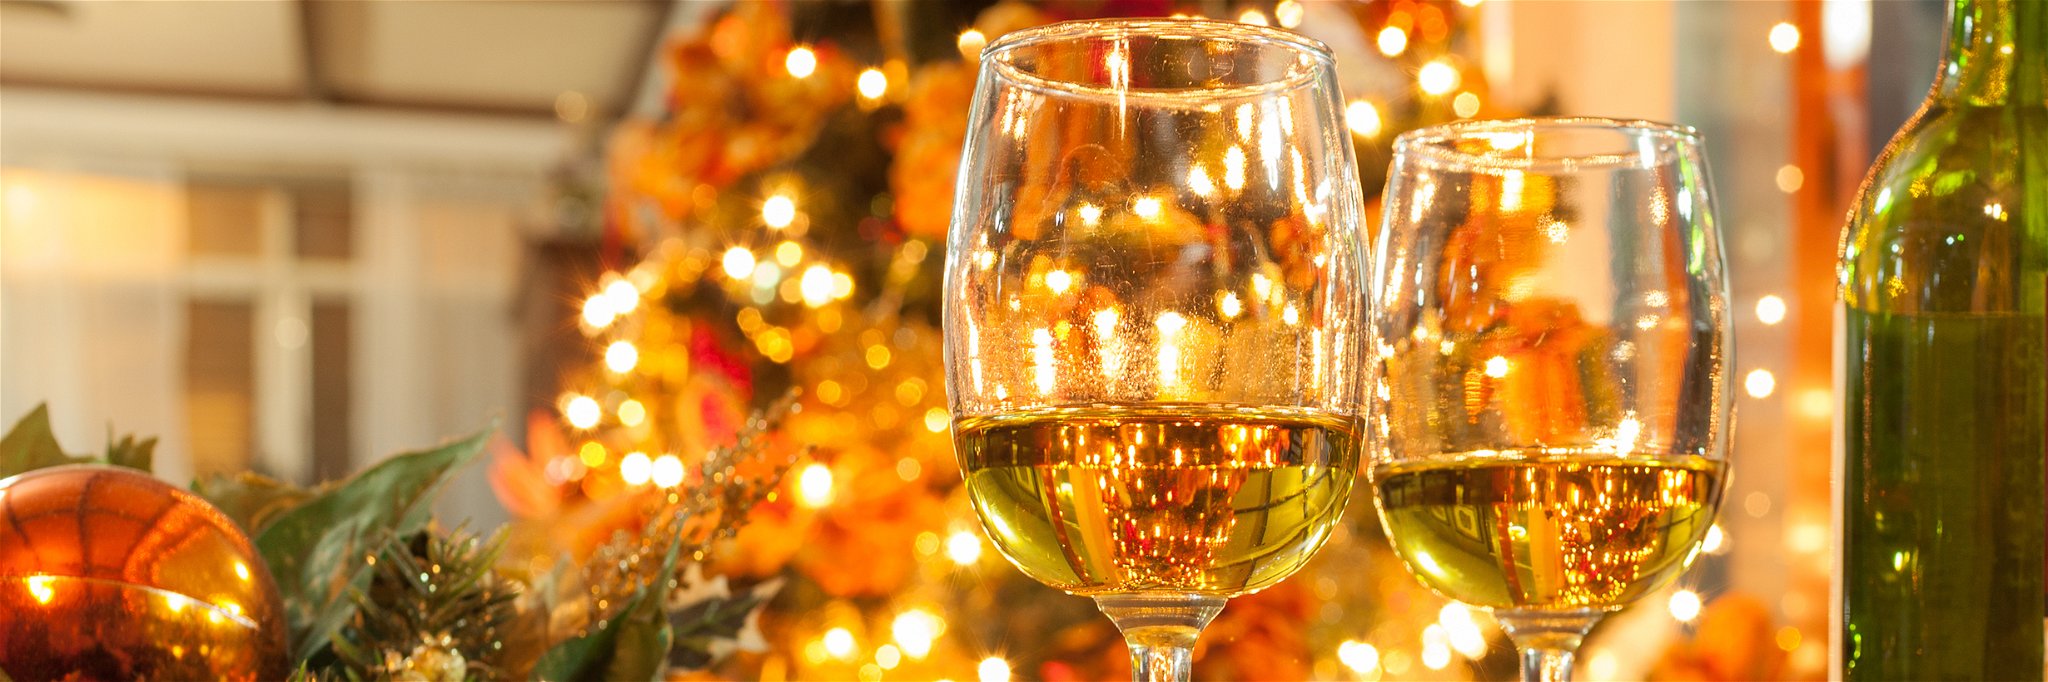 Some wines are able to balance the flavours of the Christmas table very well.